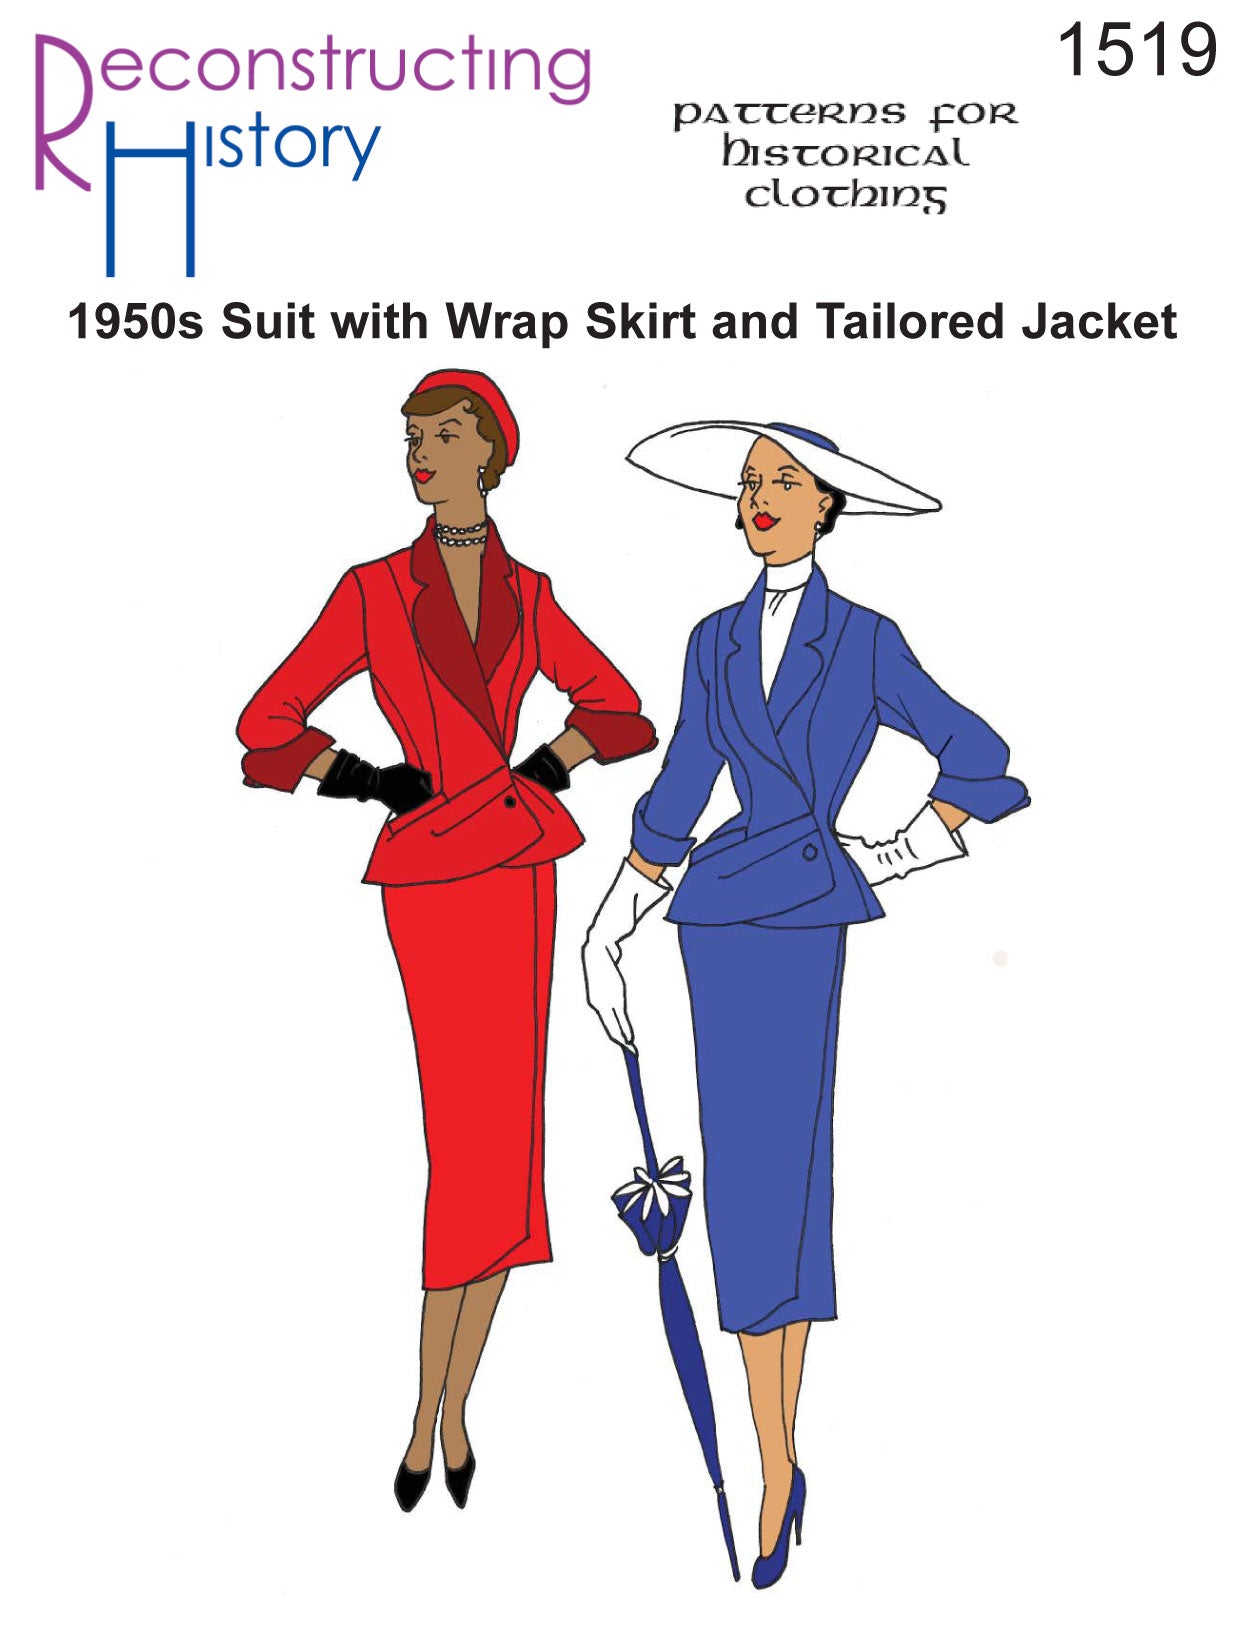 Women, Fashion, & Society: A Timeline of Women's Suit History